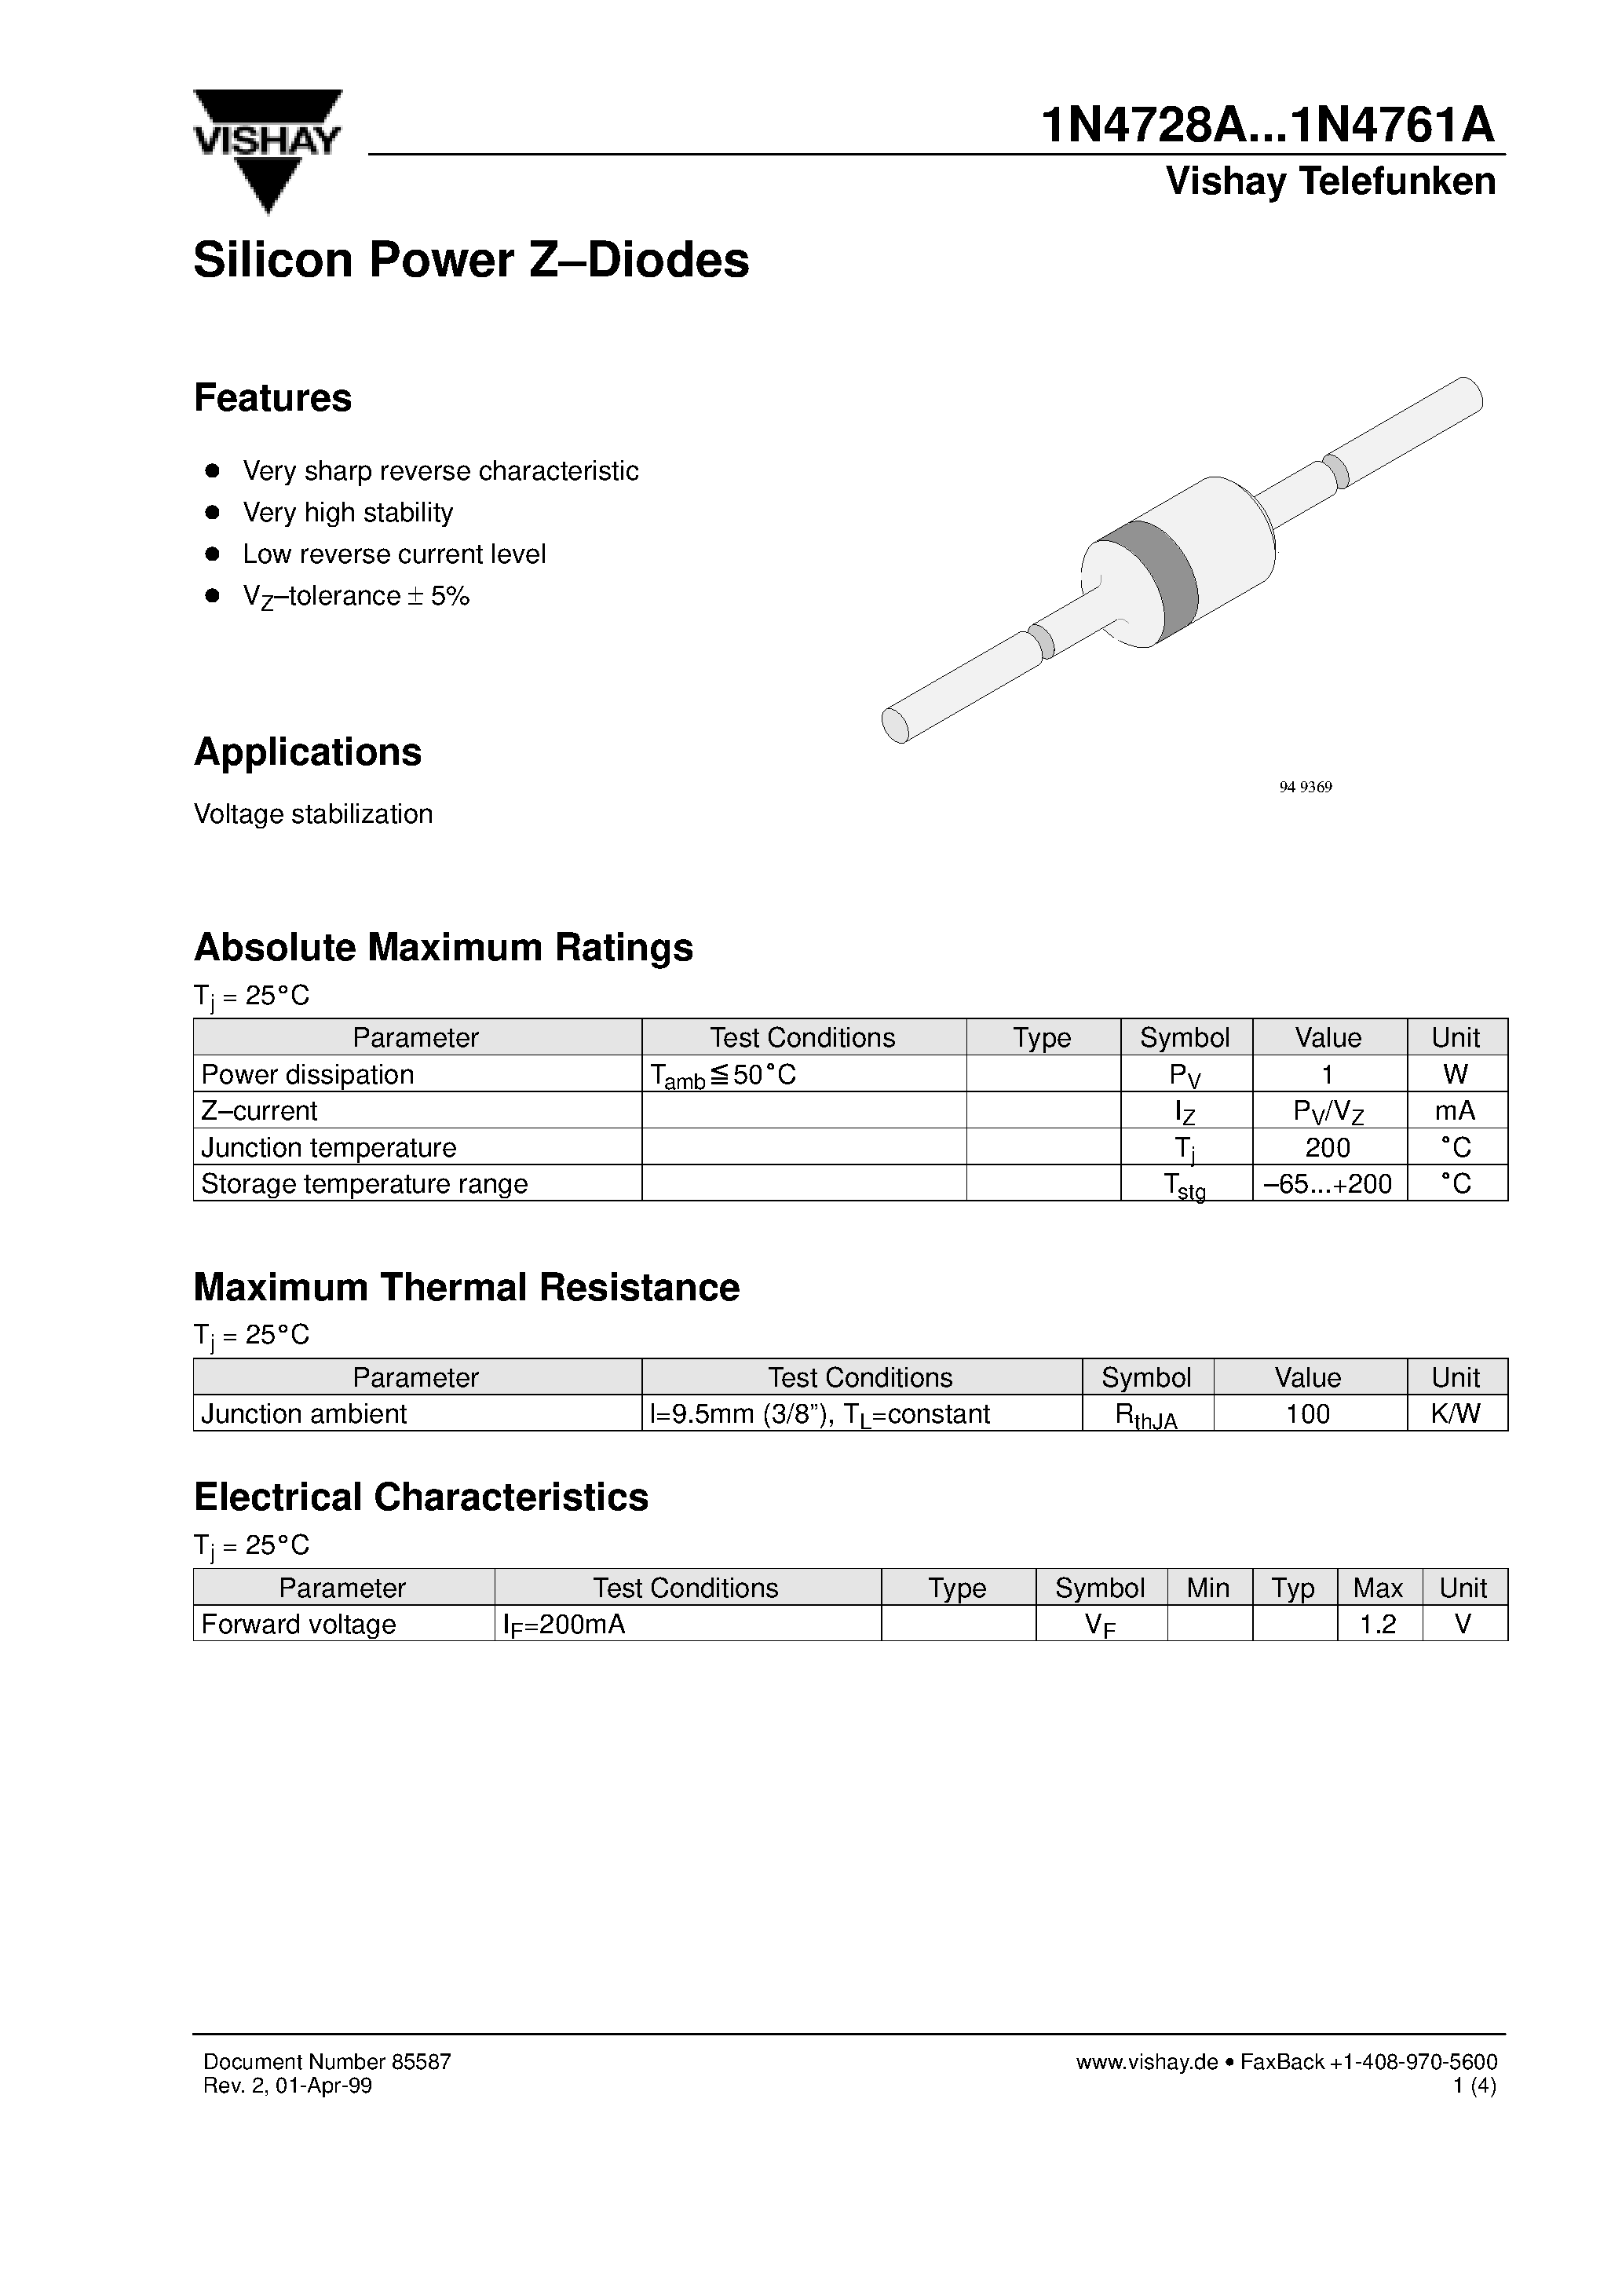 Datasheet 1N4757A - Silicon Power Z-Diodes page 1